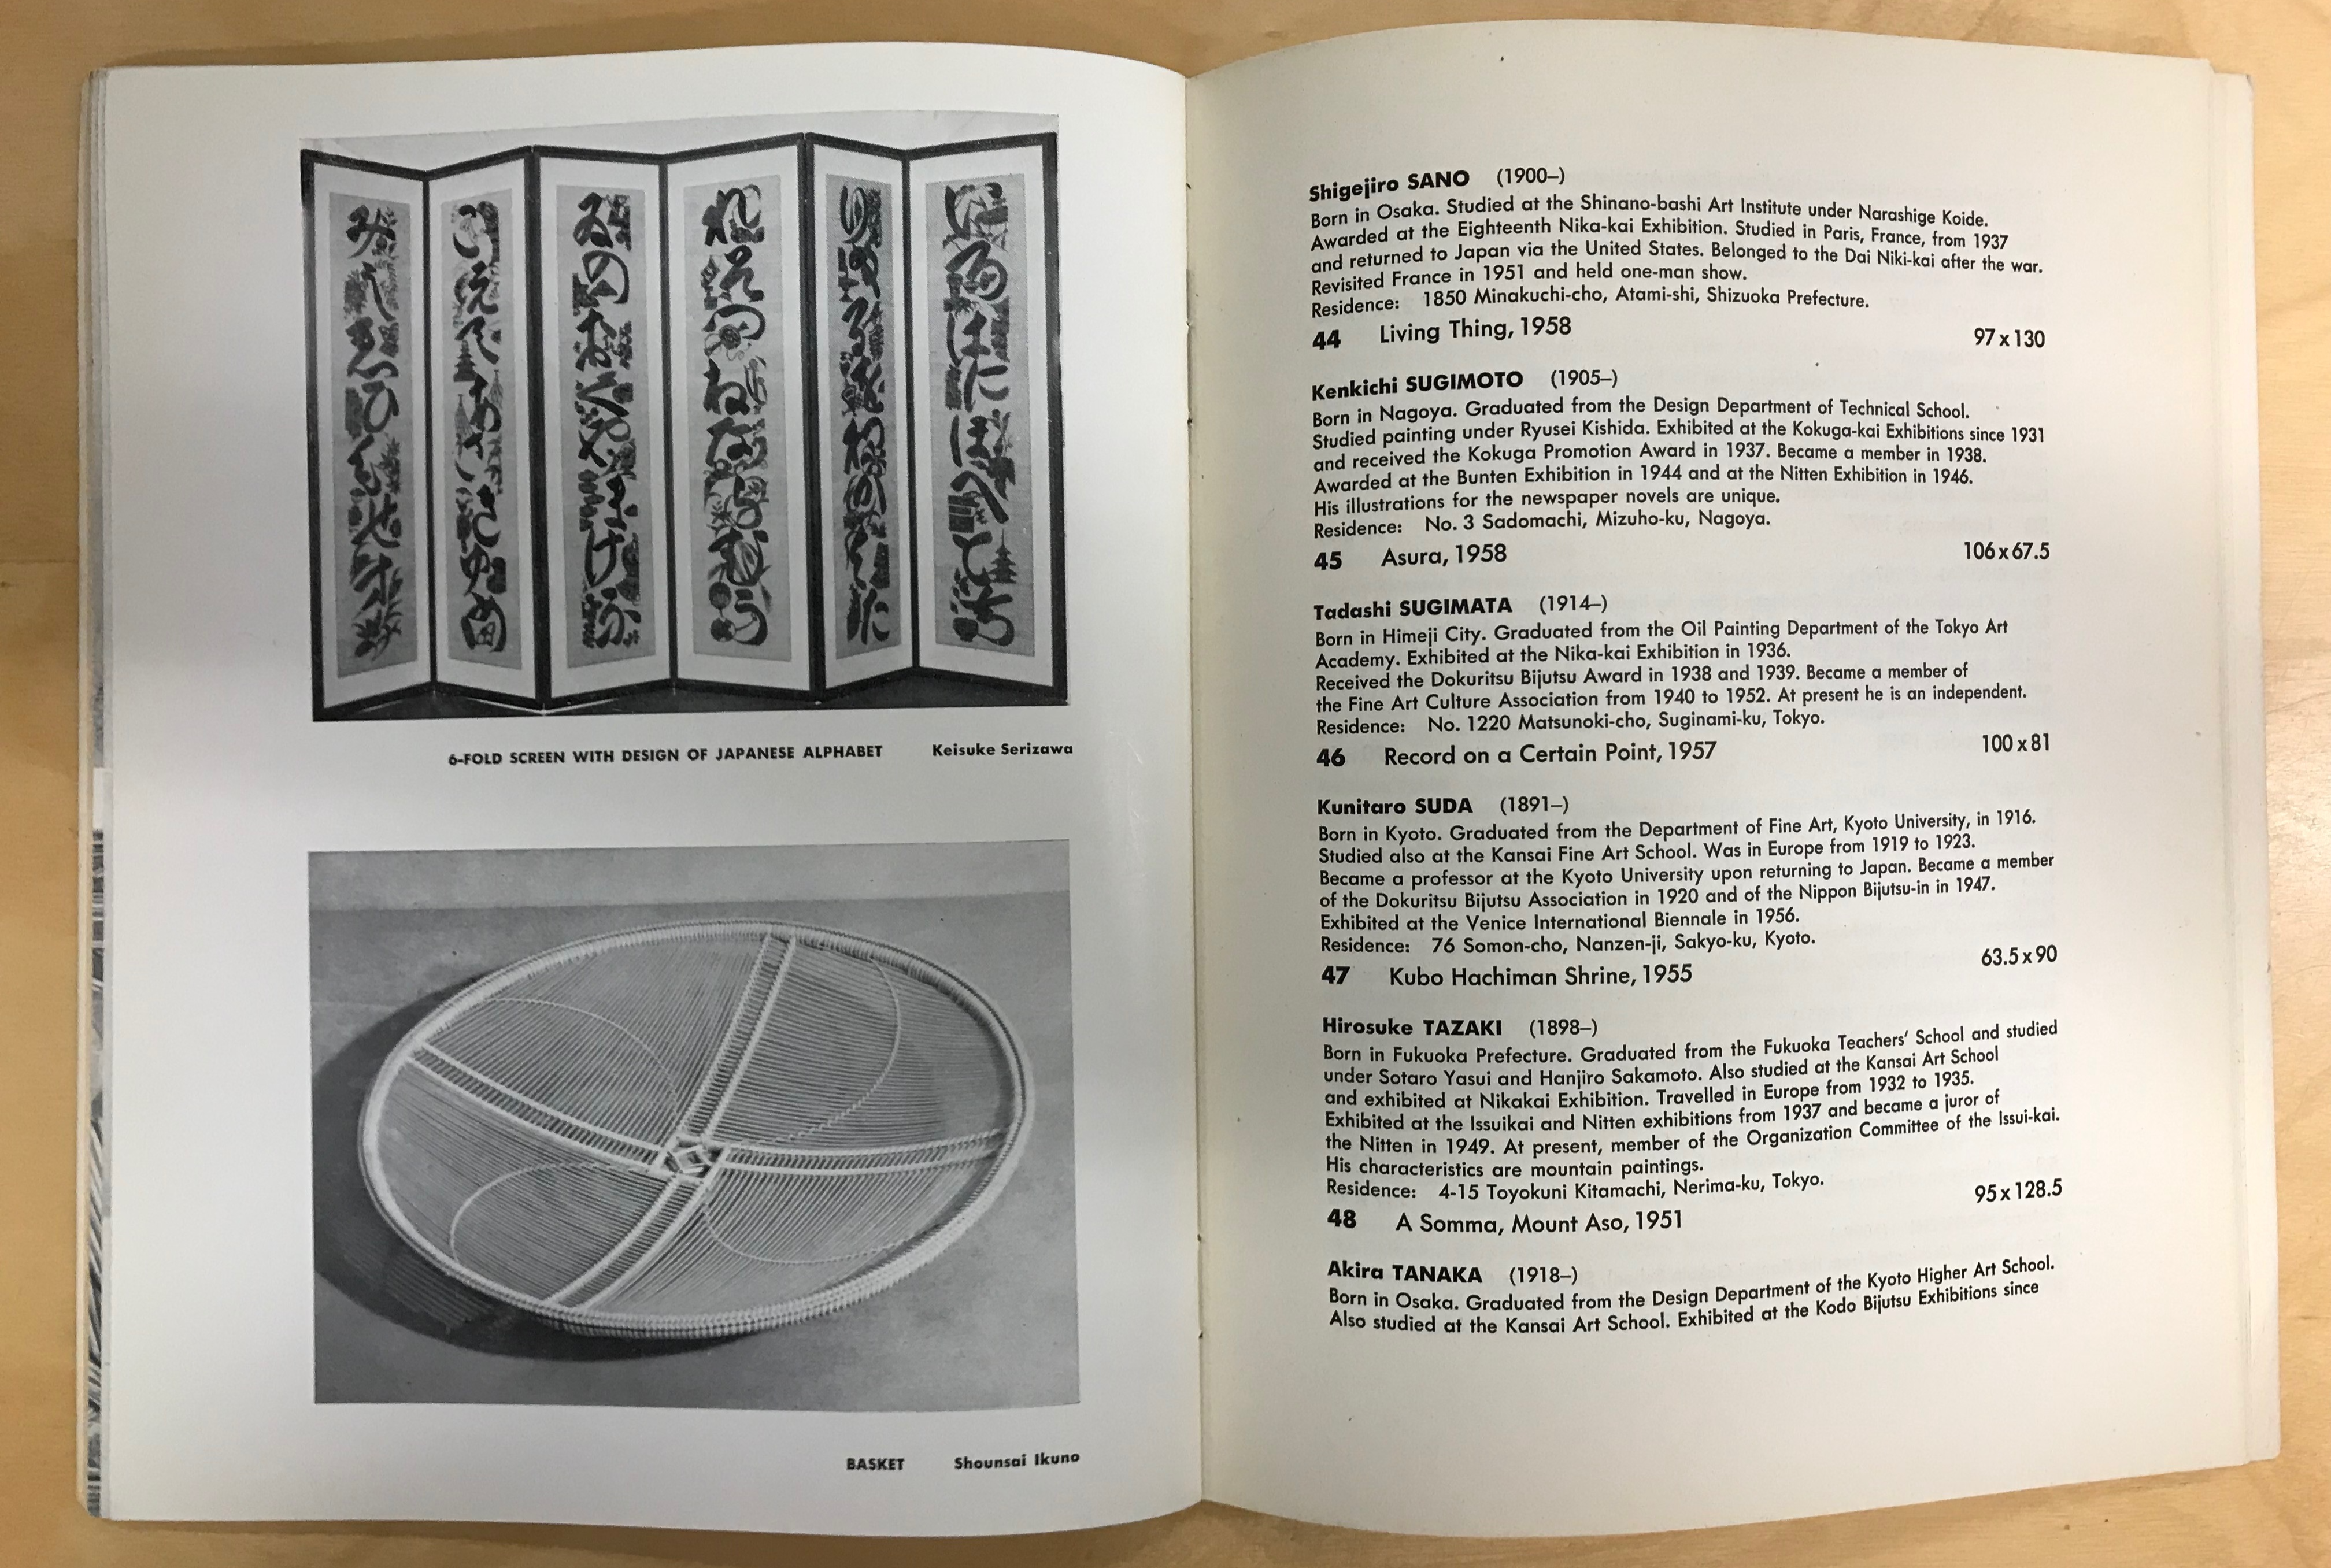 Flatlay photo of a double-page spread from a book on 'Contemporary Japanese Art'. On the left page is a photo of a Japanese folding screen.